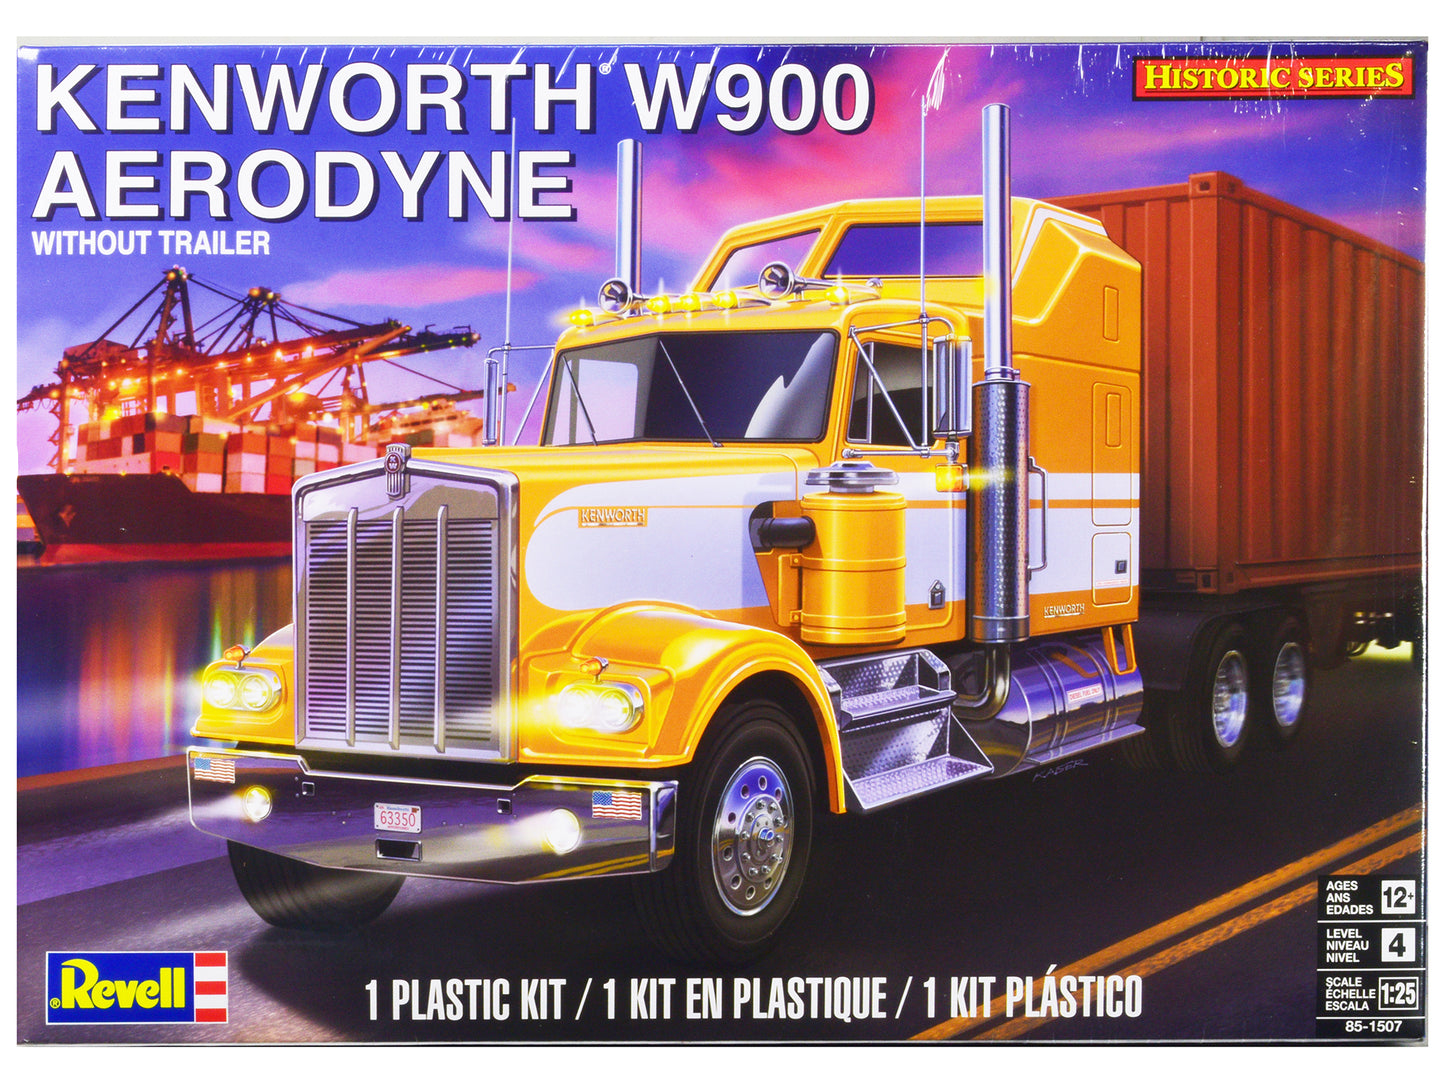 Level 4 Model Kit Kenworth W900 Aerodyne Truck Tractor "Historic Series" 1/25 Scale Model by Revell